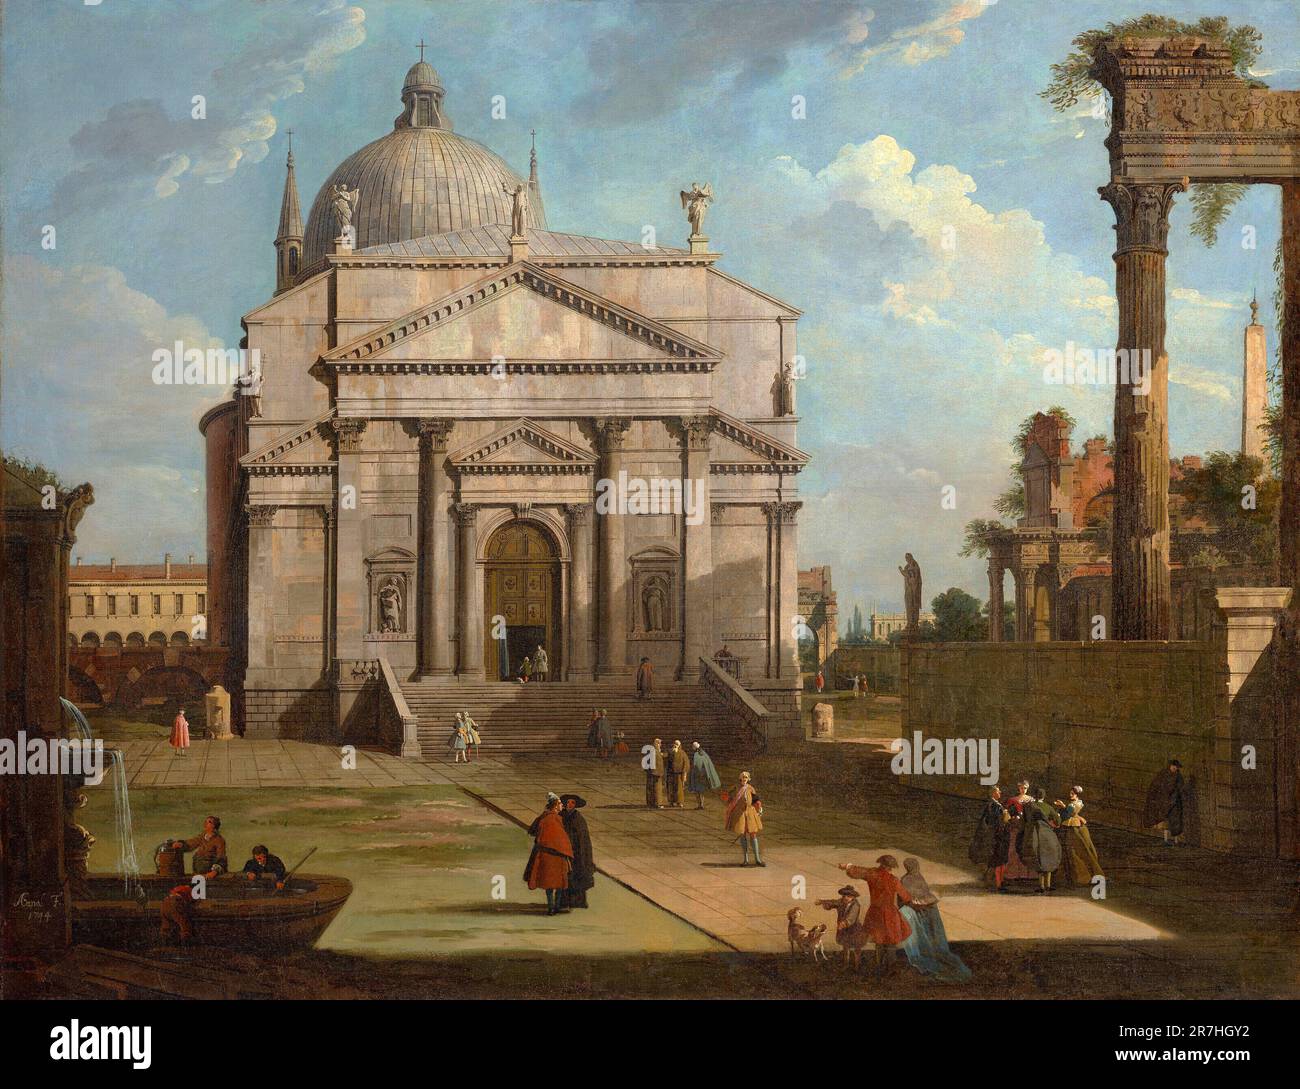 A Capriccio with the Church of the Redentore painted by the Venetian painter Giovanni Antonio Canal, commonly known as Canaletto, in 1744. Canaletto specialised in realsitic city scenes (called Verduti) but occasionally he painted from his imagination, which he called Capriccio Stock Photo